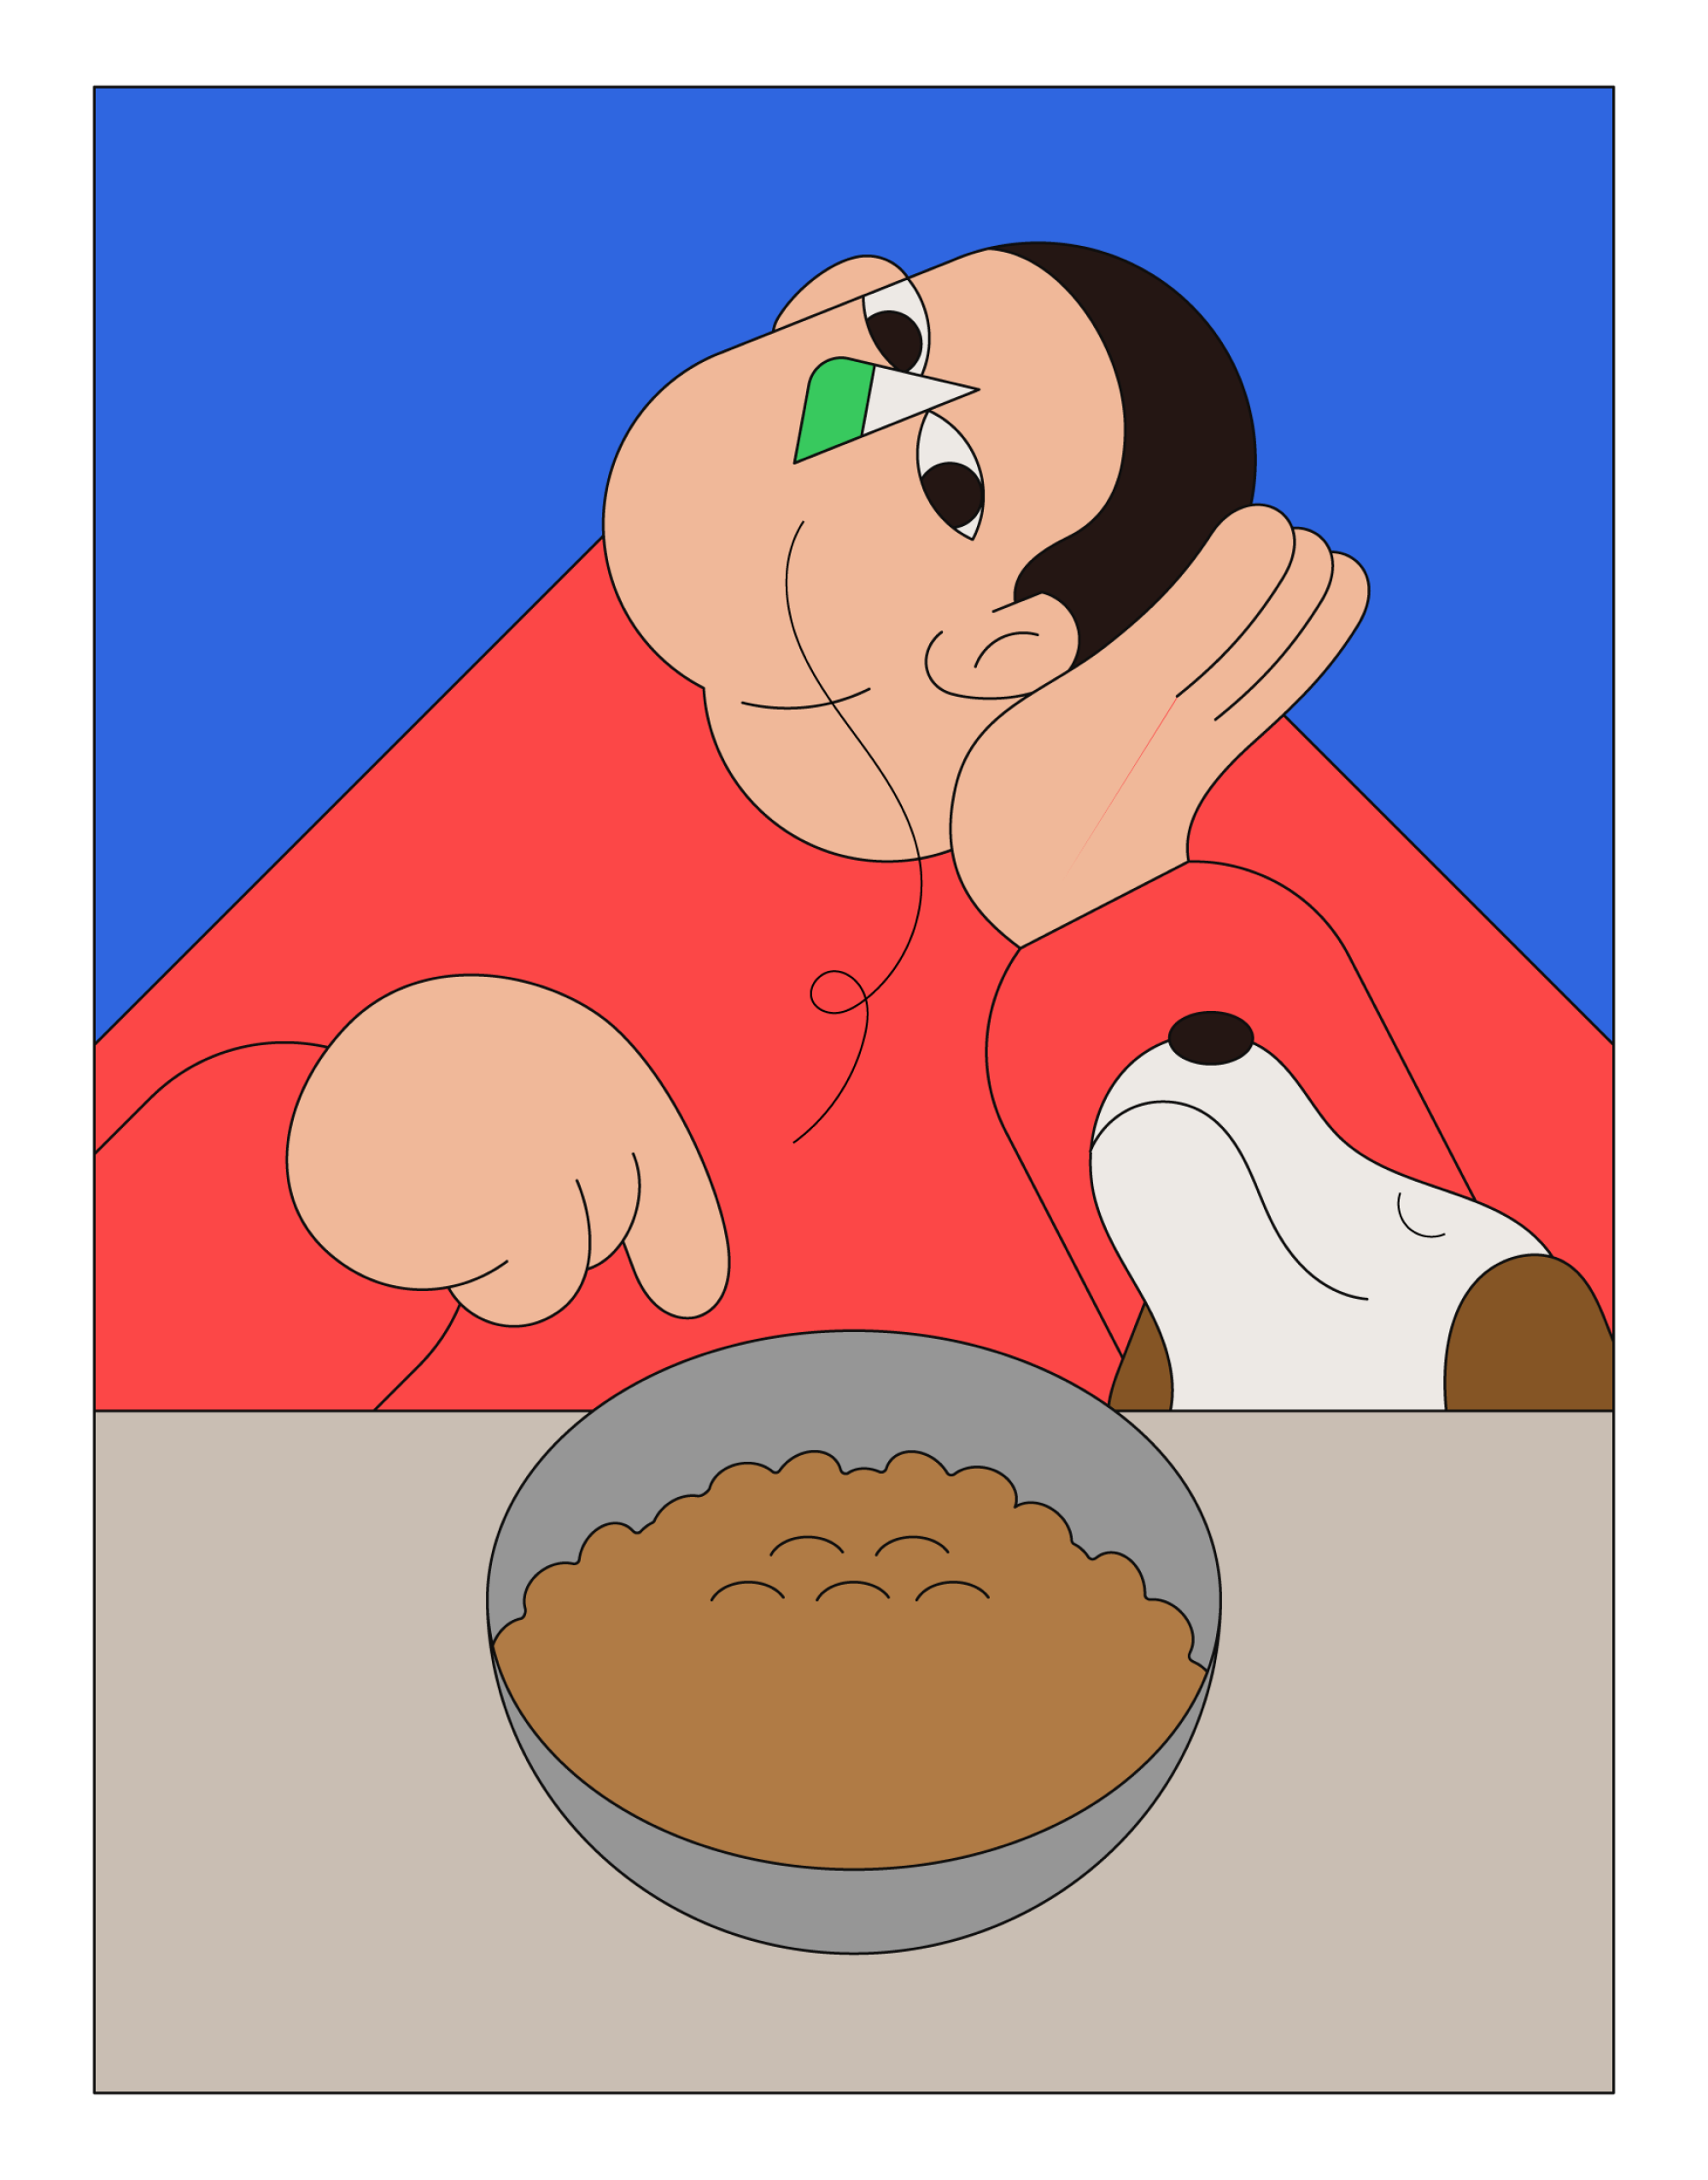 Illustration of a person with a green nose and a dog next to him, pointing to a bowl of kibble, with a scent line waving above